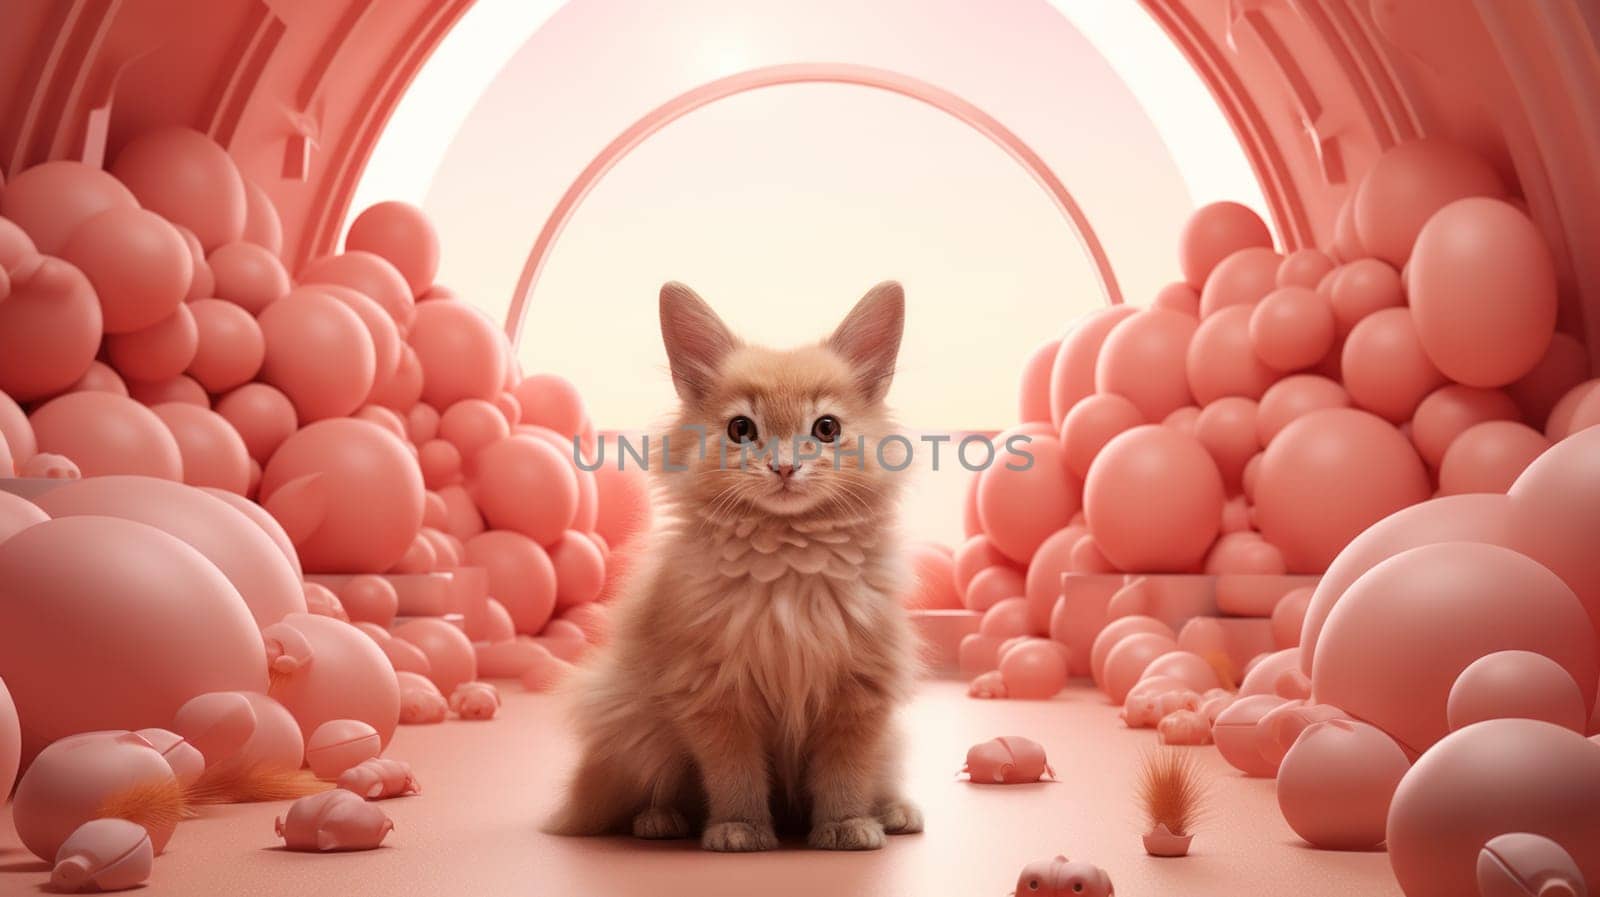 A cat sitting in a room full of pink balls and other objects, AI by starush